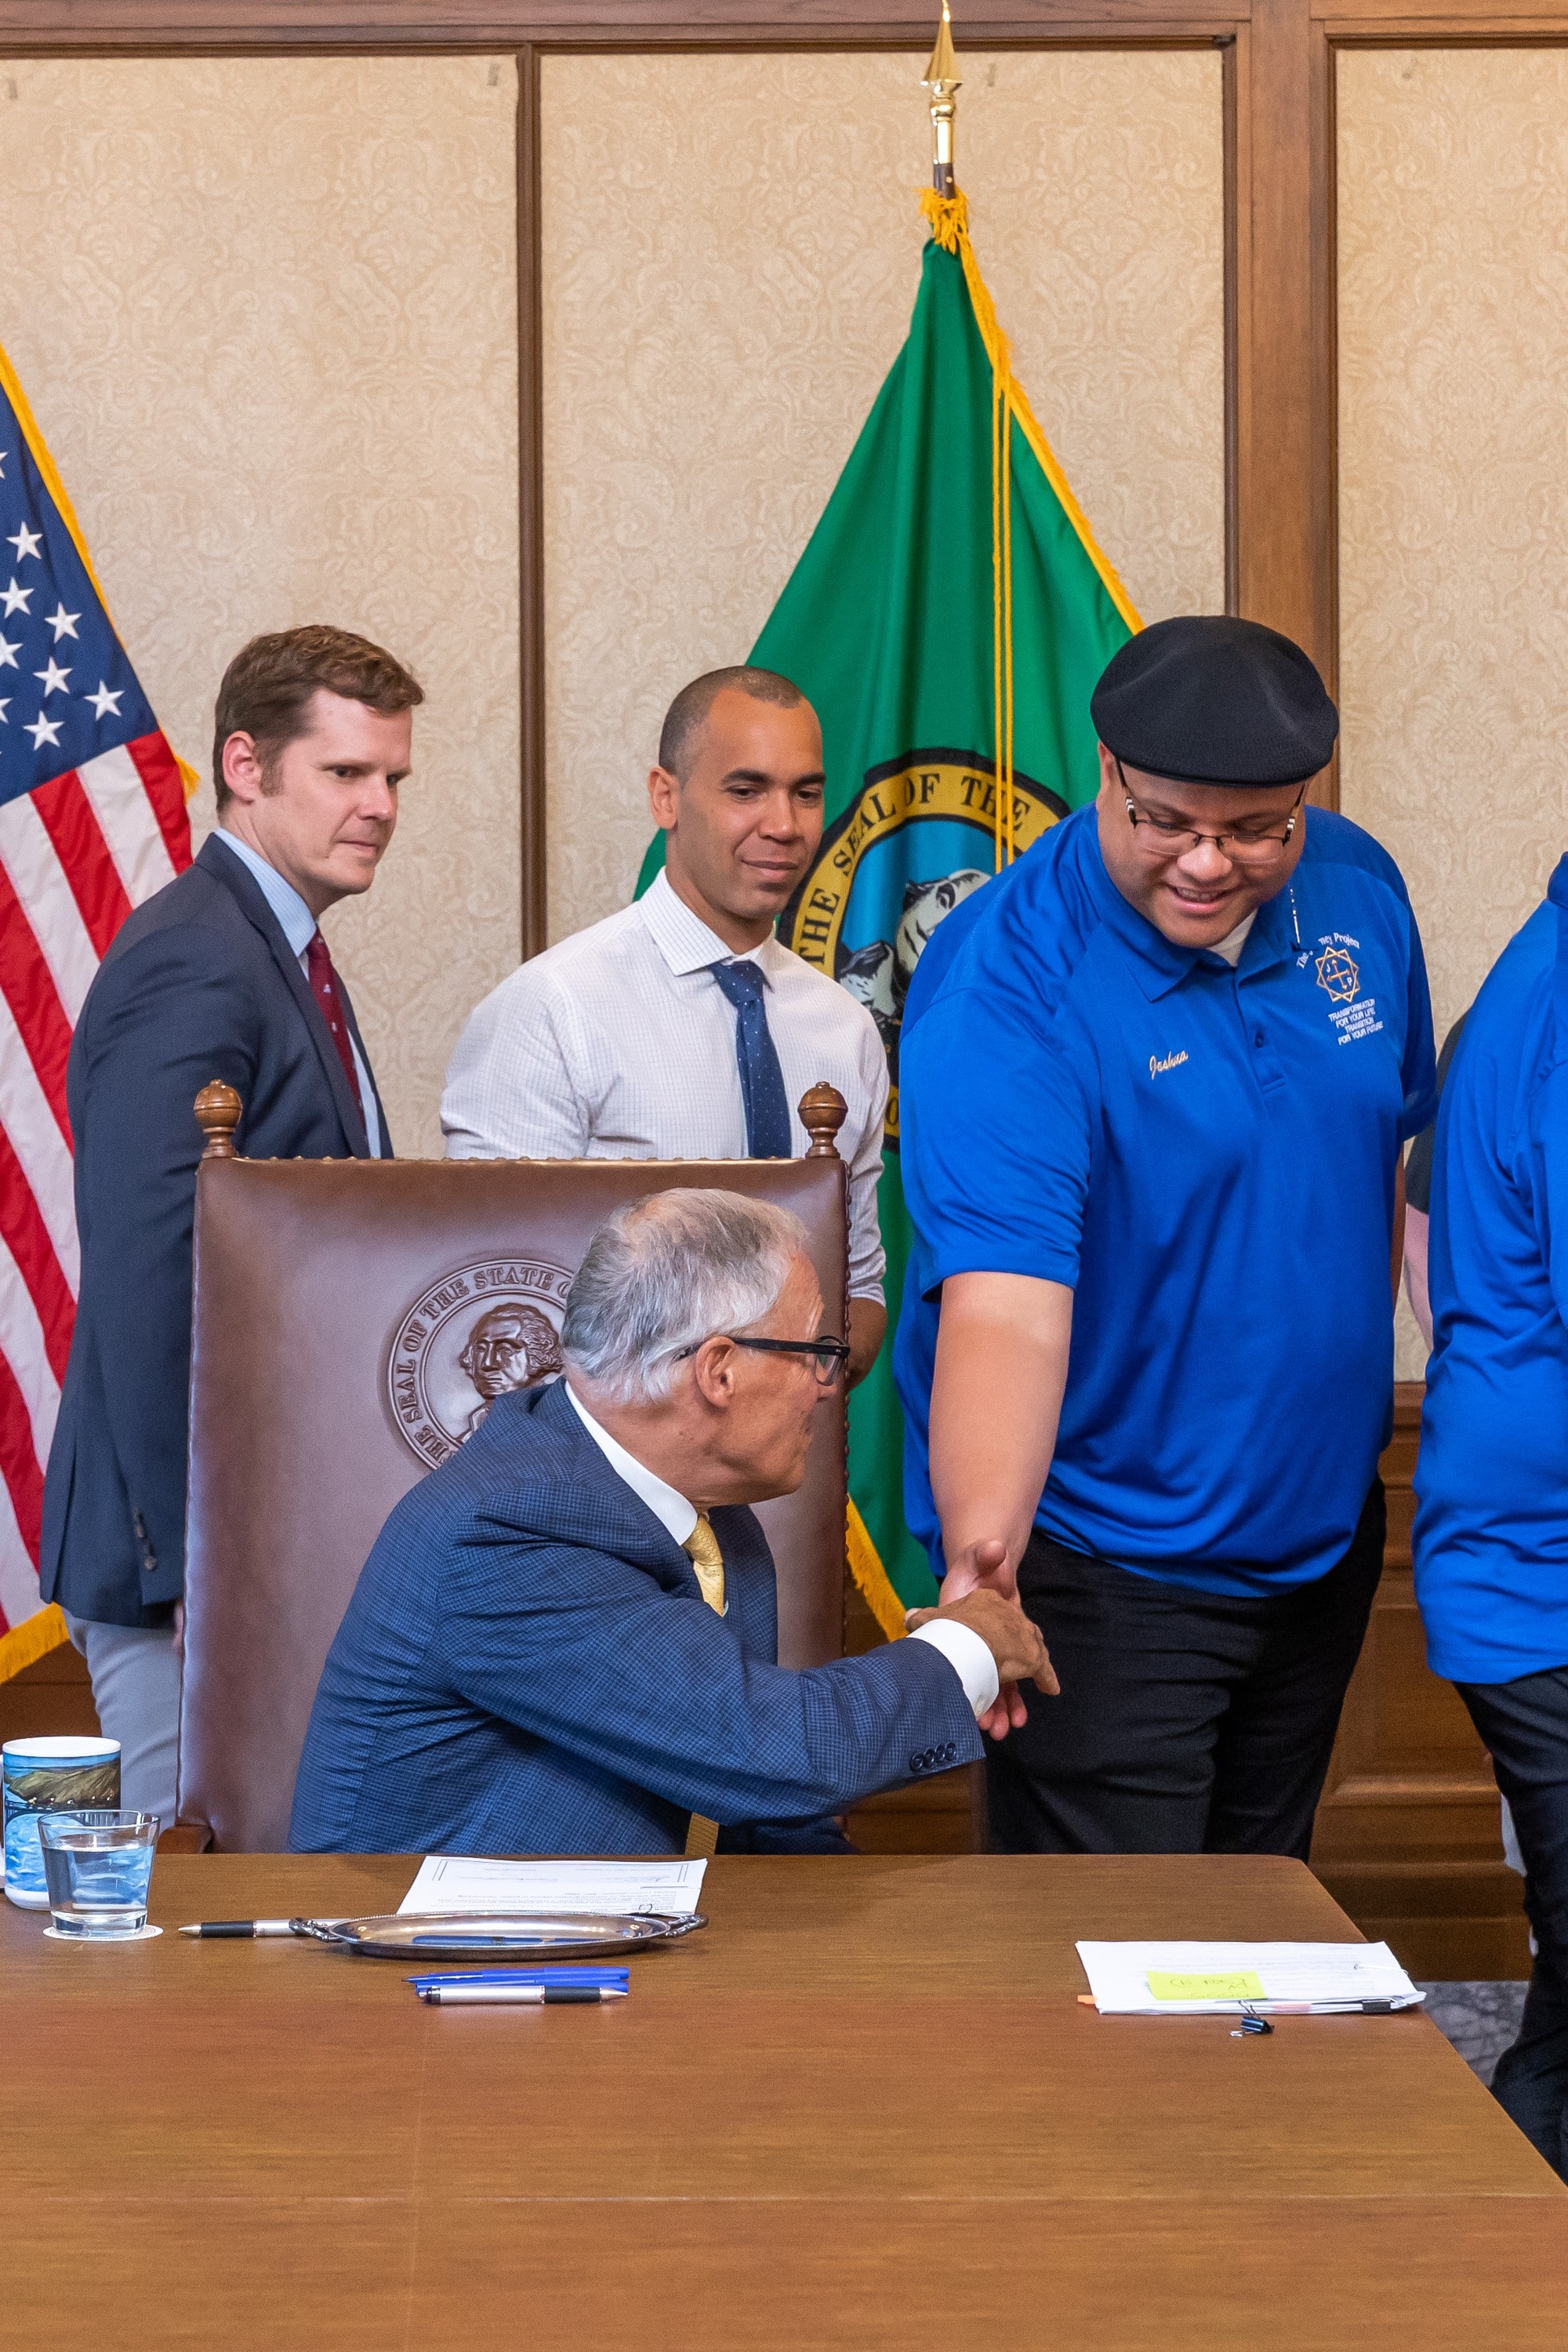 One of our Directors Joshua shaking the hand of Governor Inslee.